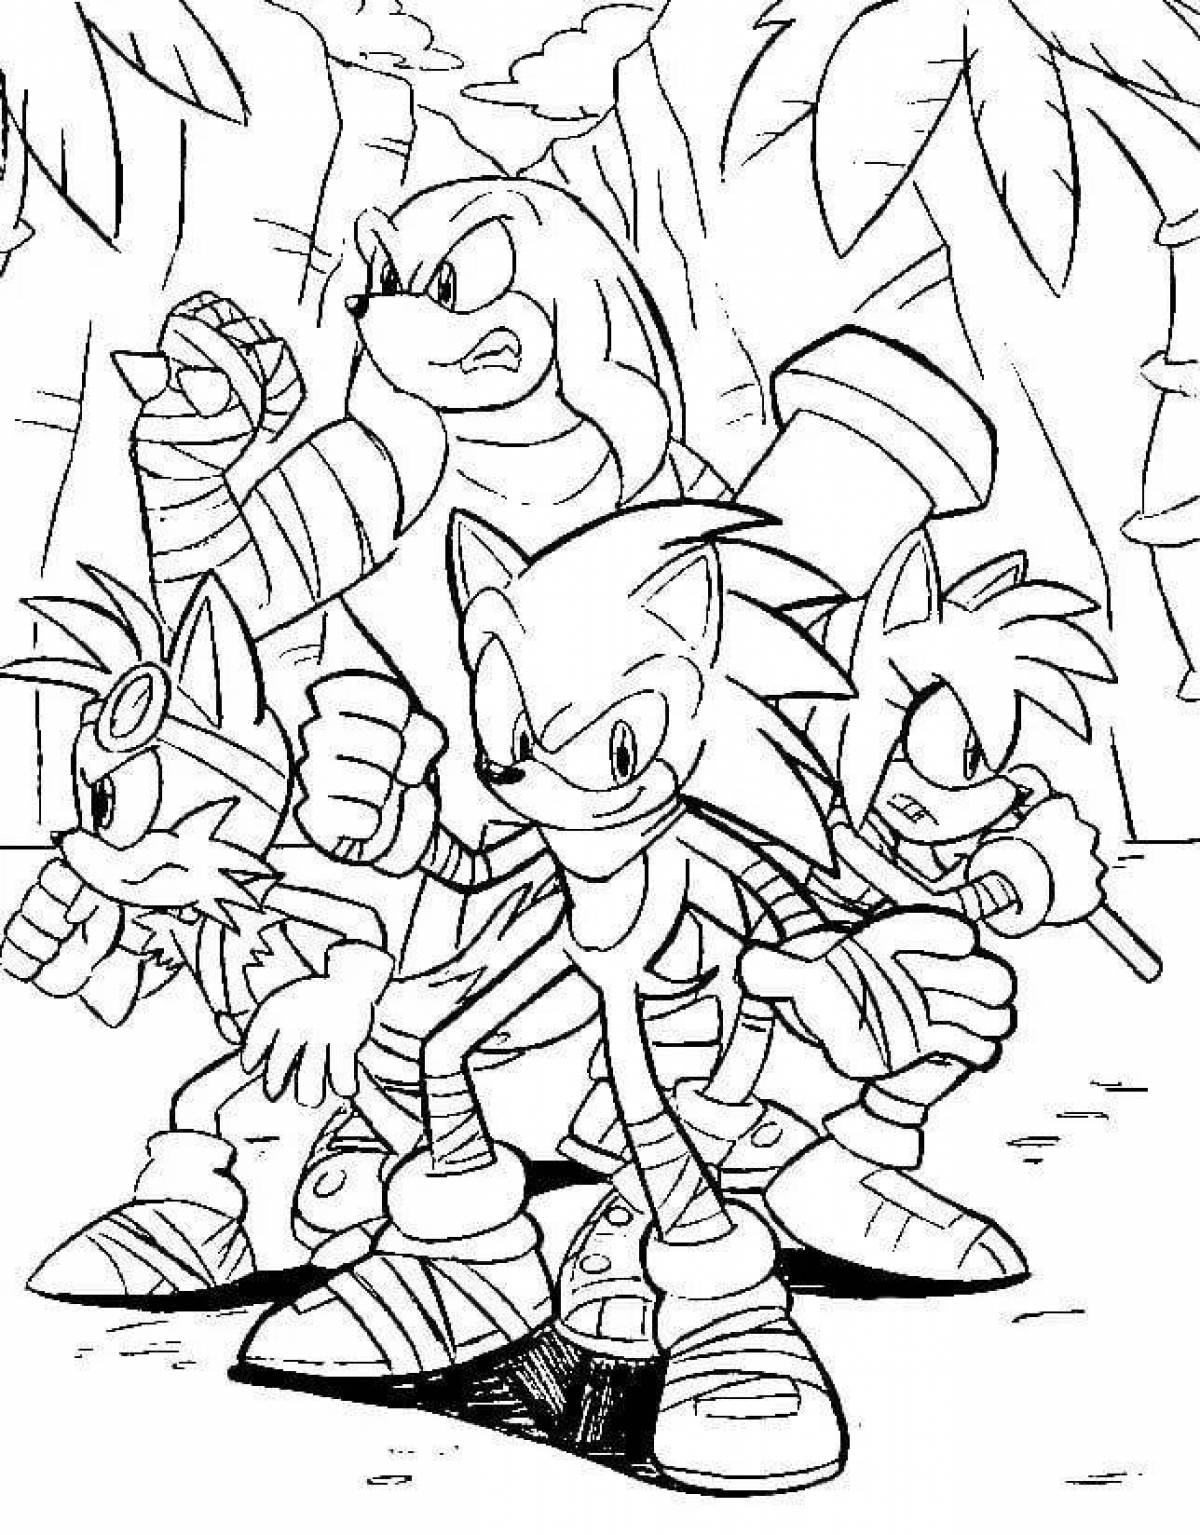 Animated sonic heroes coloring book